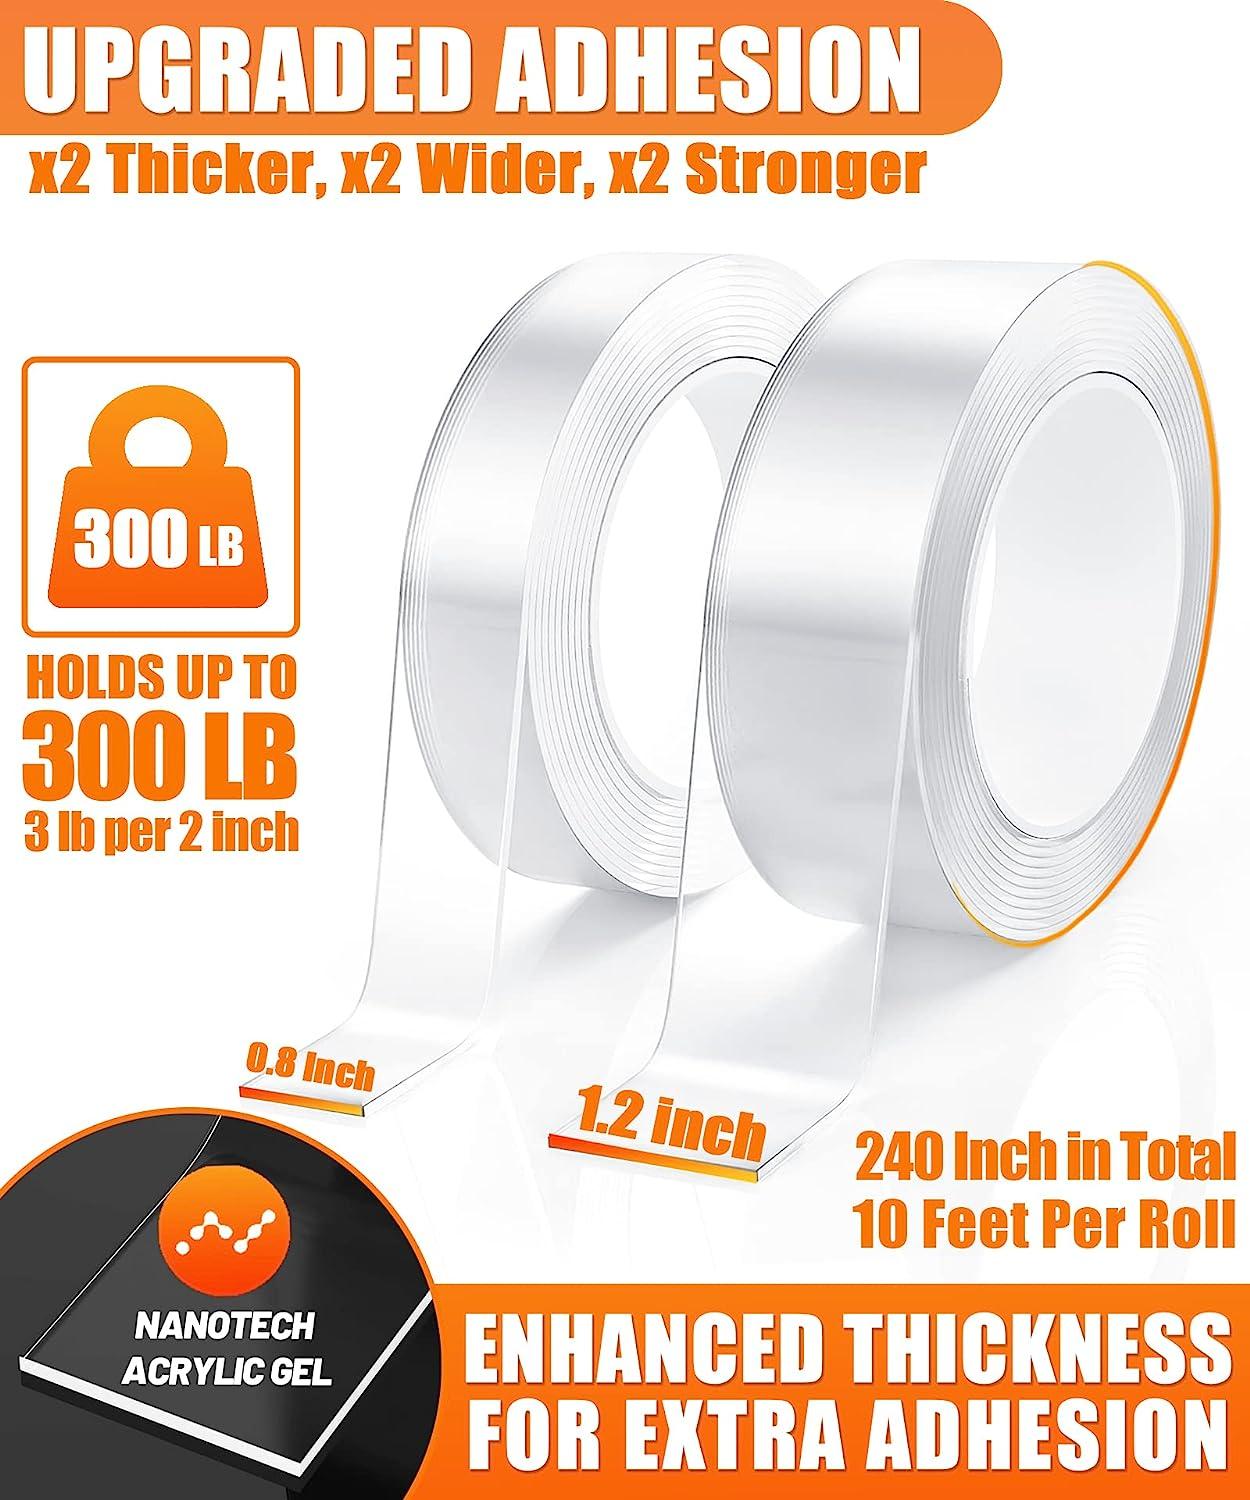 2 Rolls Double Sided Tape Heavy Duty - 240 x 1.2 & 0.8 - Removable Nano  Tape for Poster Carpet Picture Hanging Strip Rug Wall Outdoor - Clear 